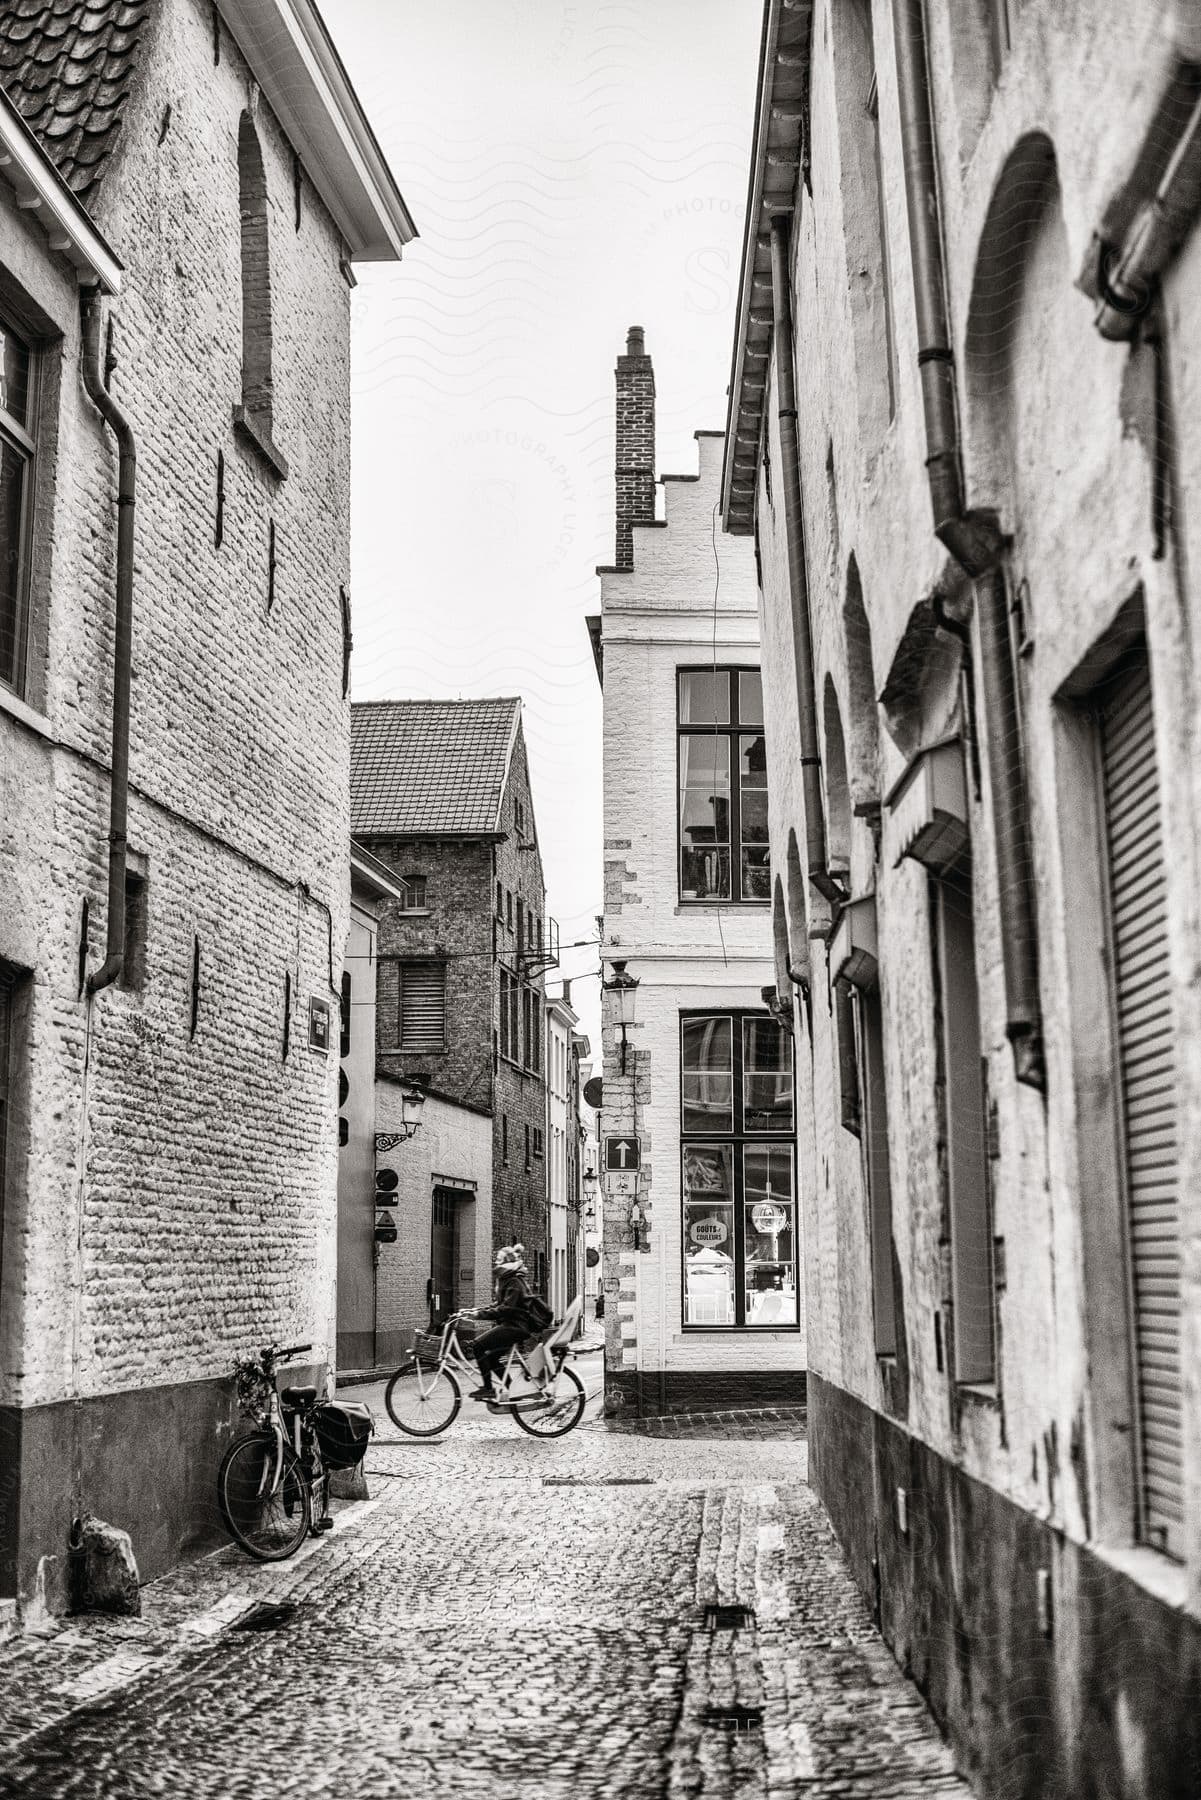 An alley in a town in the netherlands with a person riding a bicycle on cobblestone roads